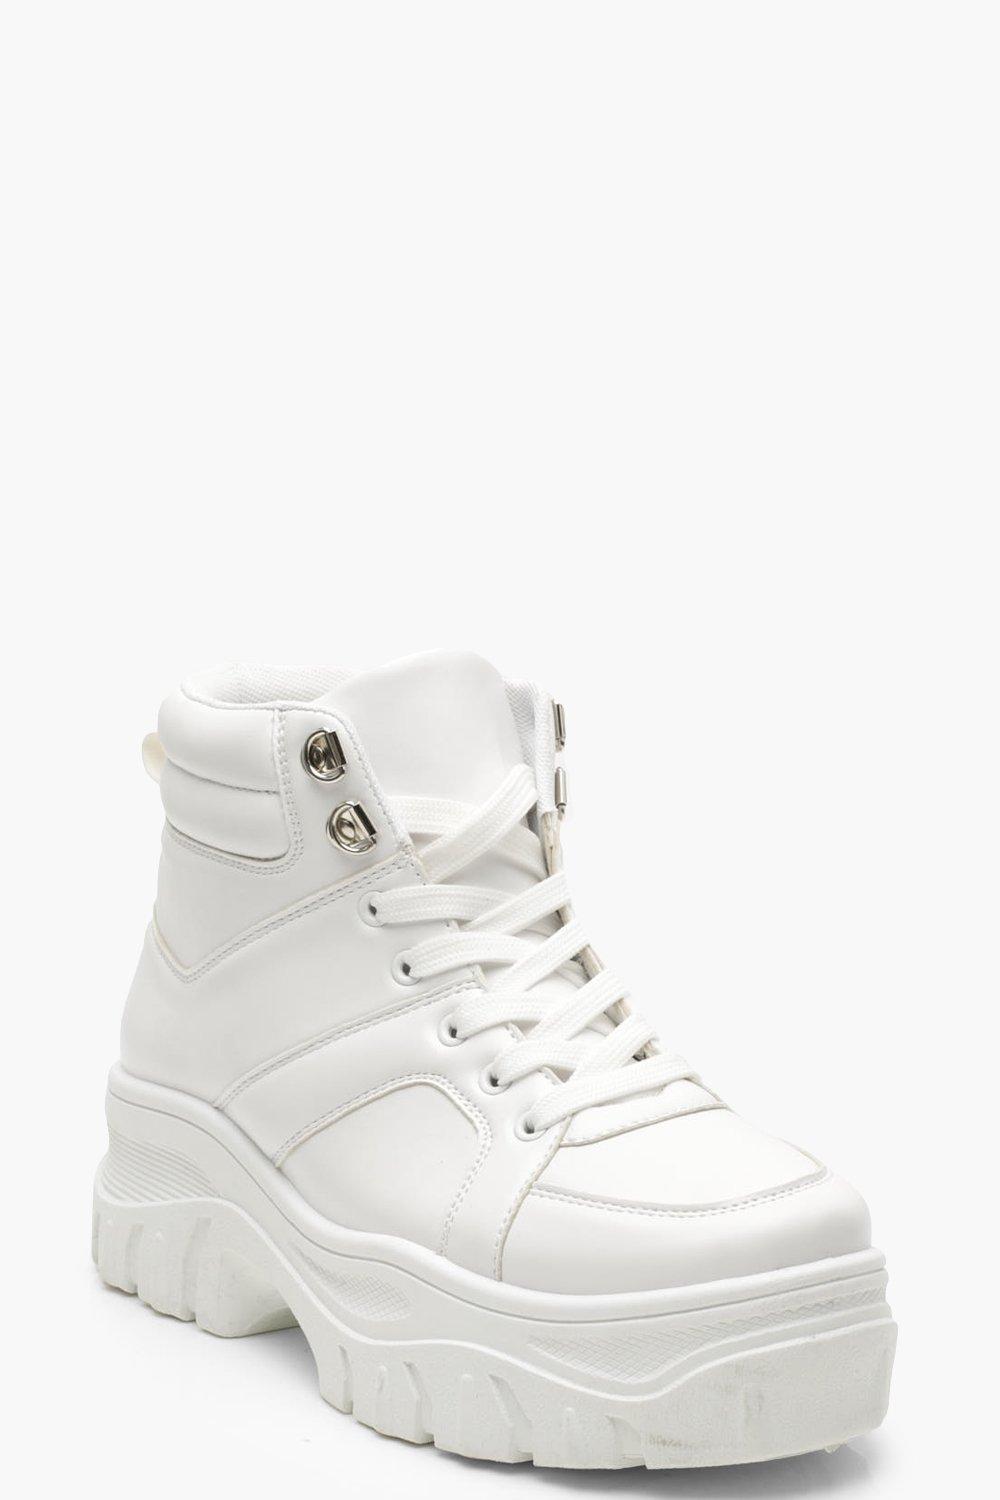 Boohoo Womens Lace Up Chunky High Top Sneakers - White - 9 - Lyst